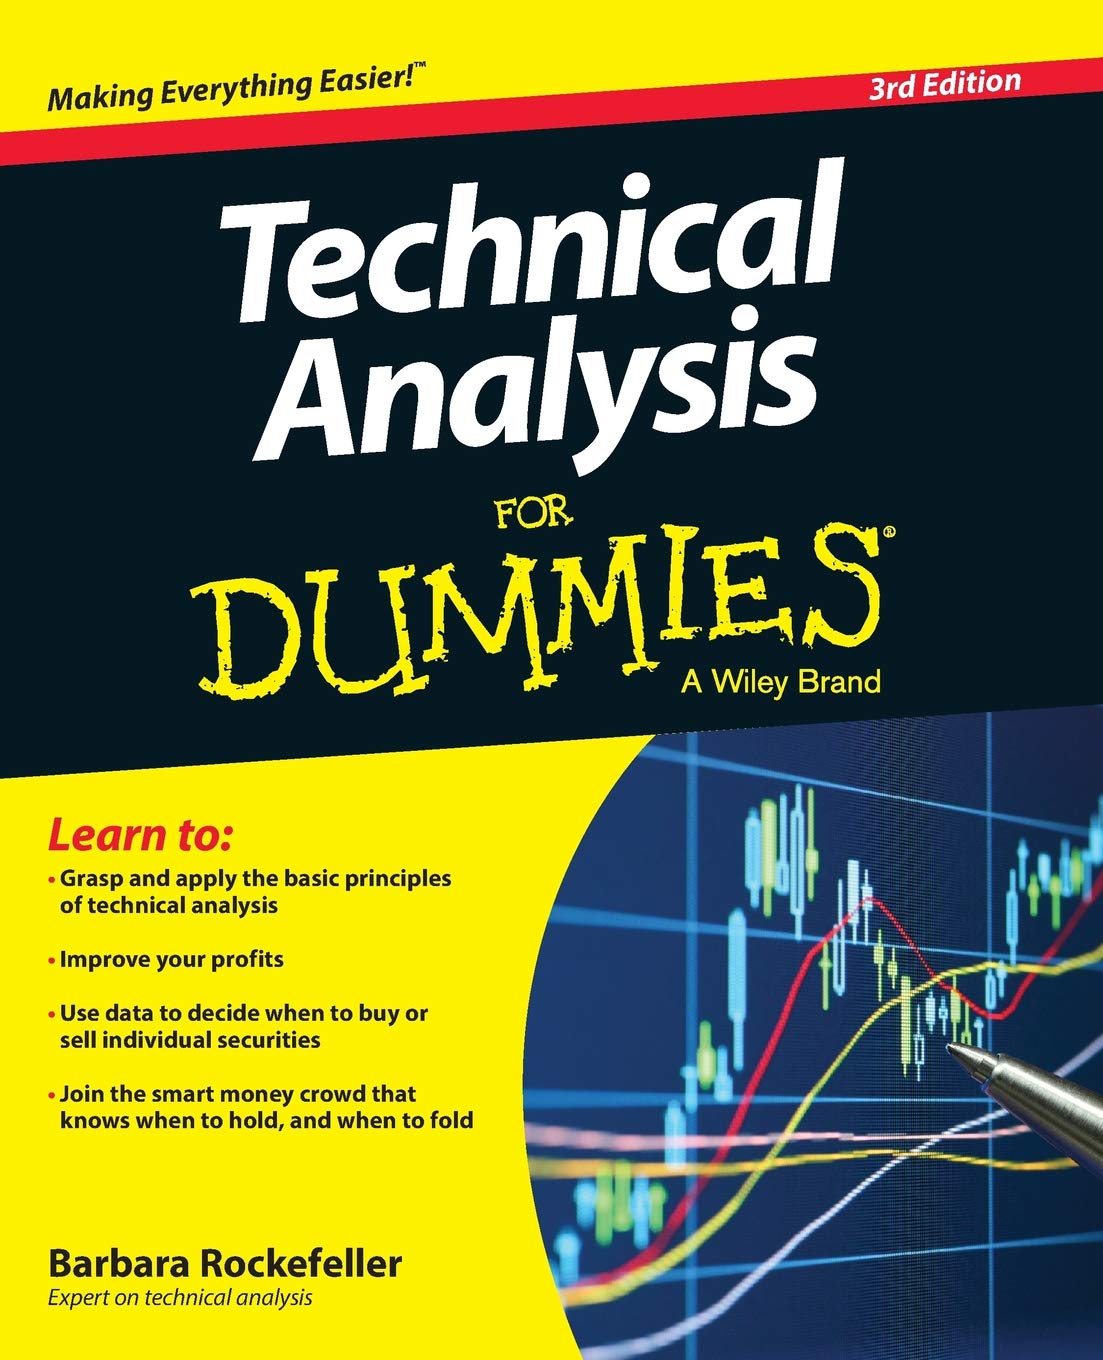 Top 20 Best Technical Analysis Books To Elevate Your Trading Techniques - 718caRc5HlL